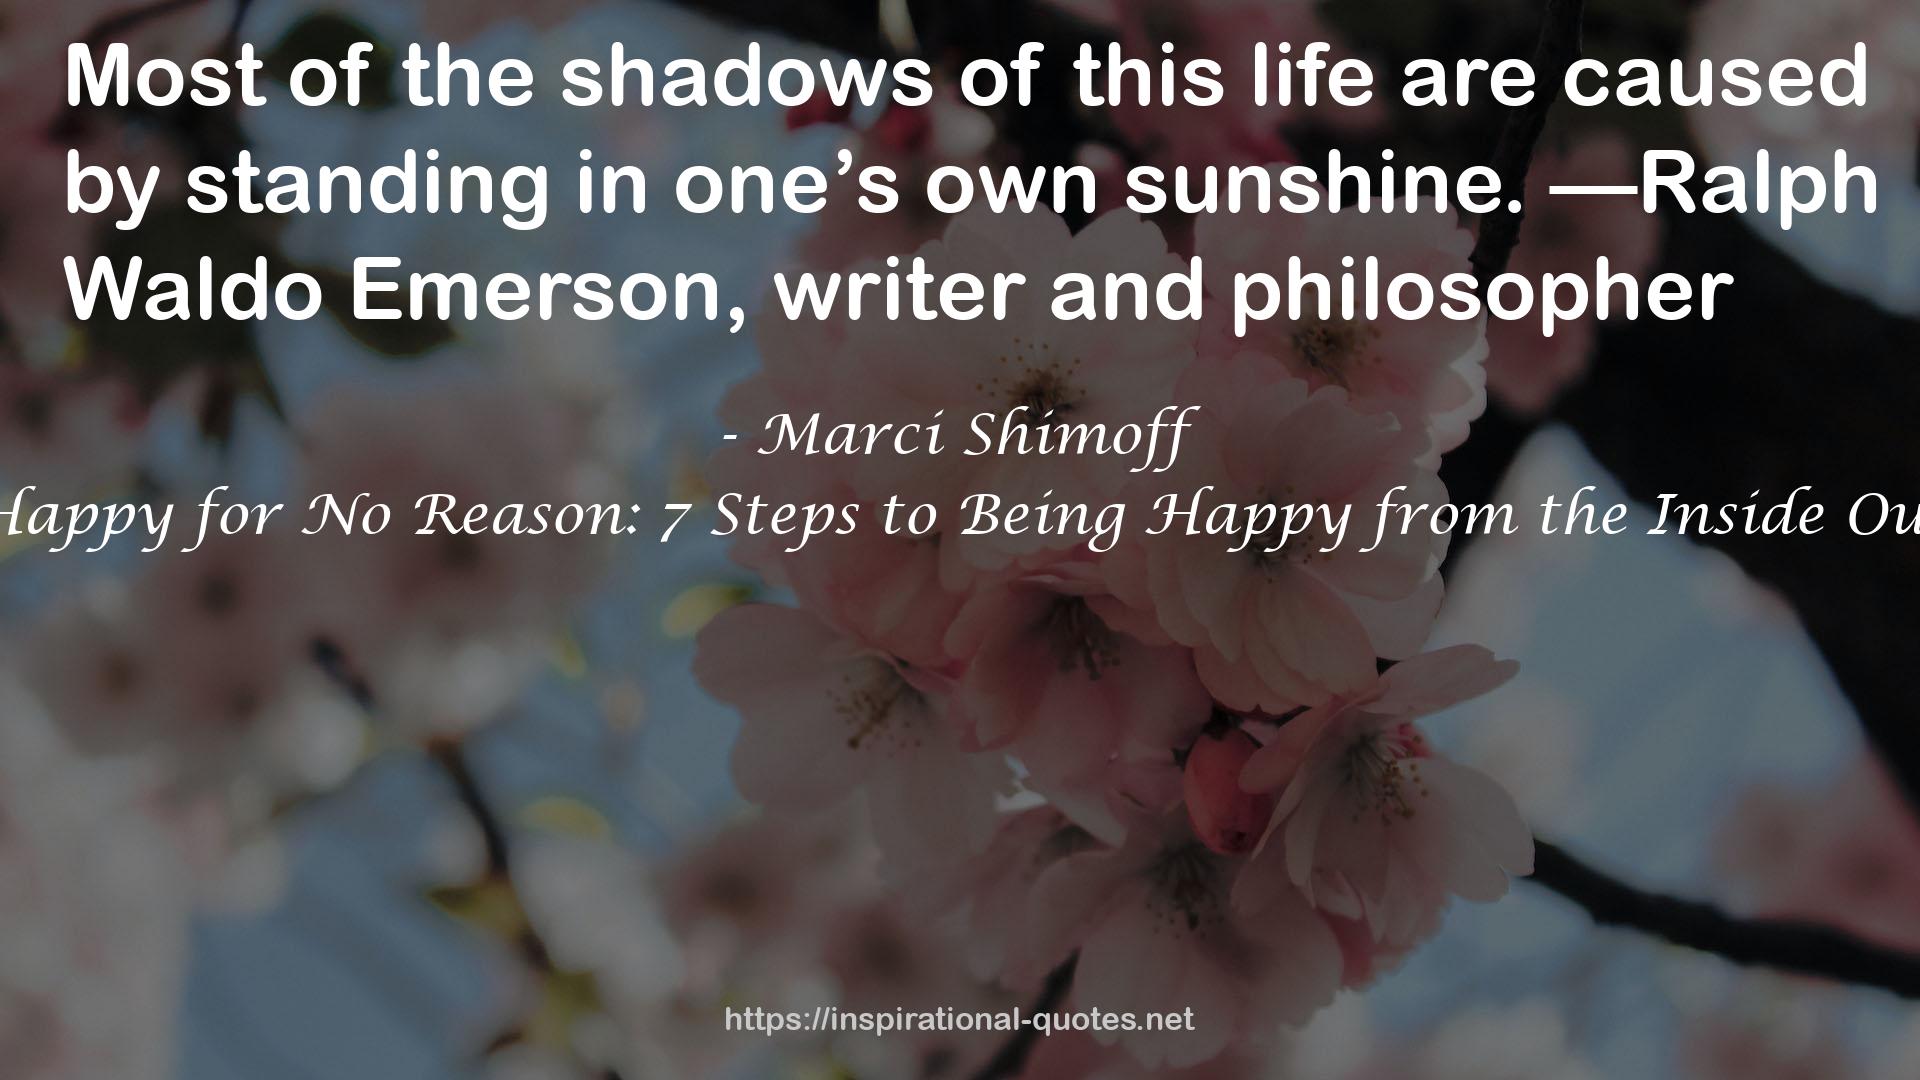 Happy for No Reason: 7 Steps to Being Happy from the Inside Out QUOTES